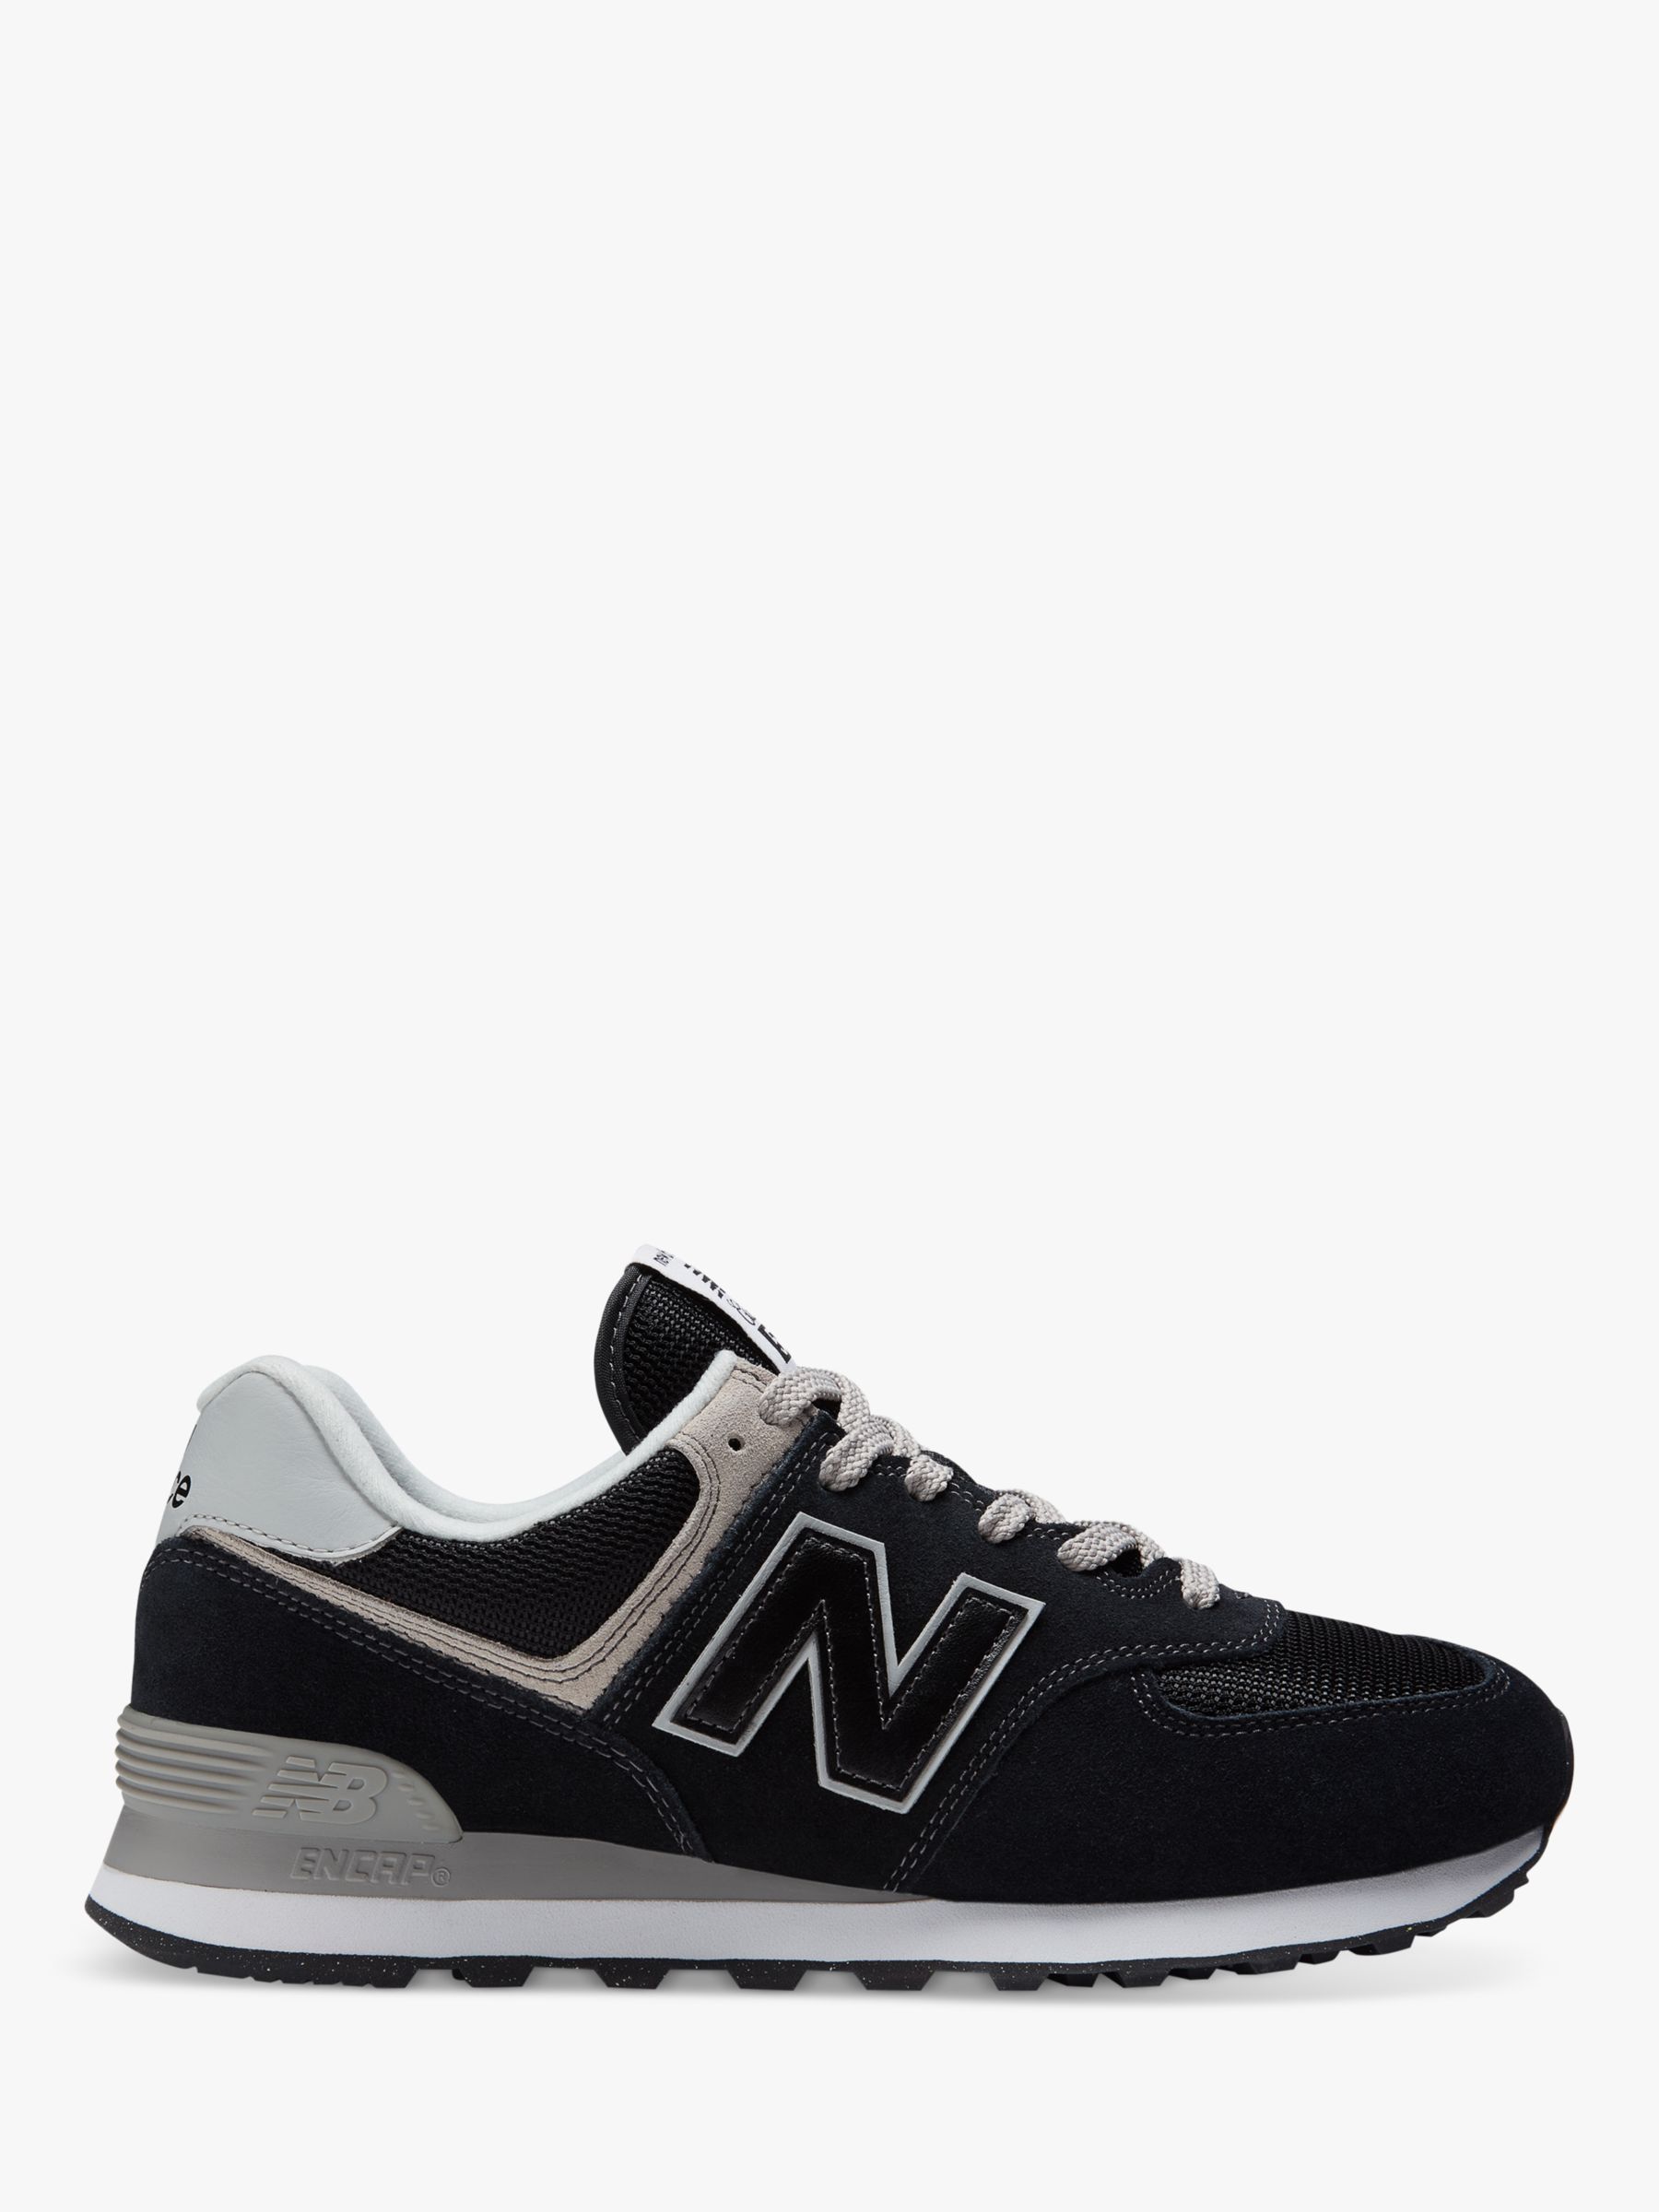 alfombra Rey Lear emergencia New Balance 574 Trainers, Black at John Lewis & Partners